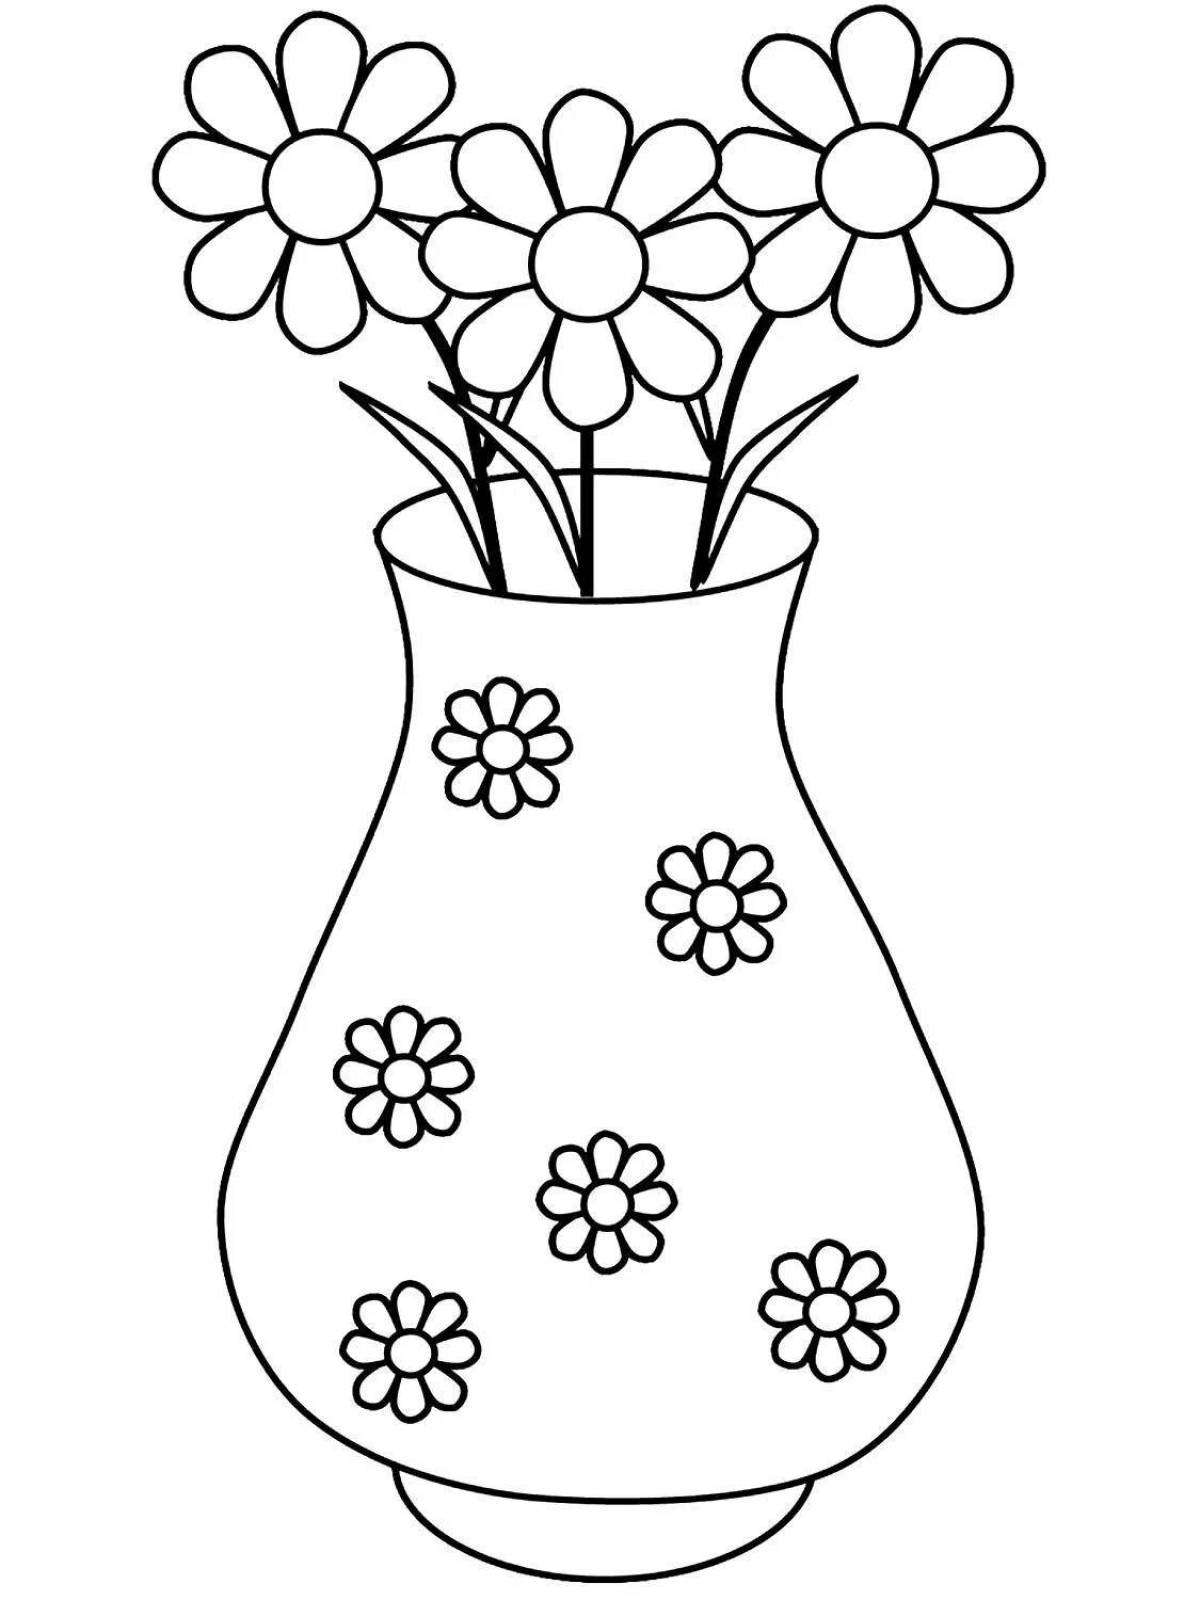 Coloring page amazing vase pattern